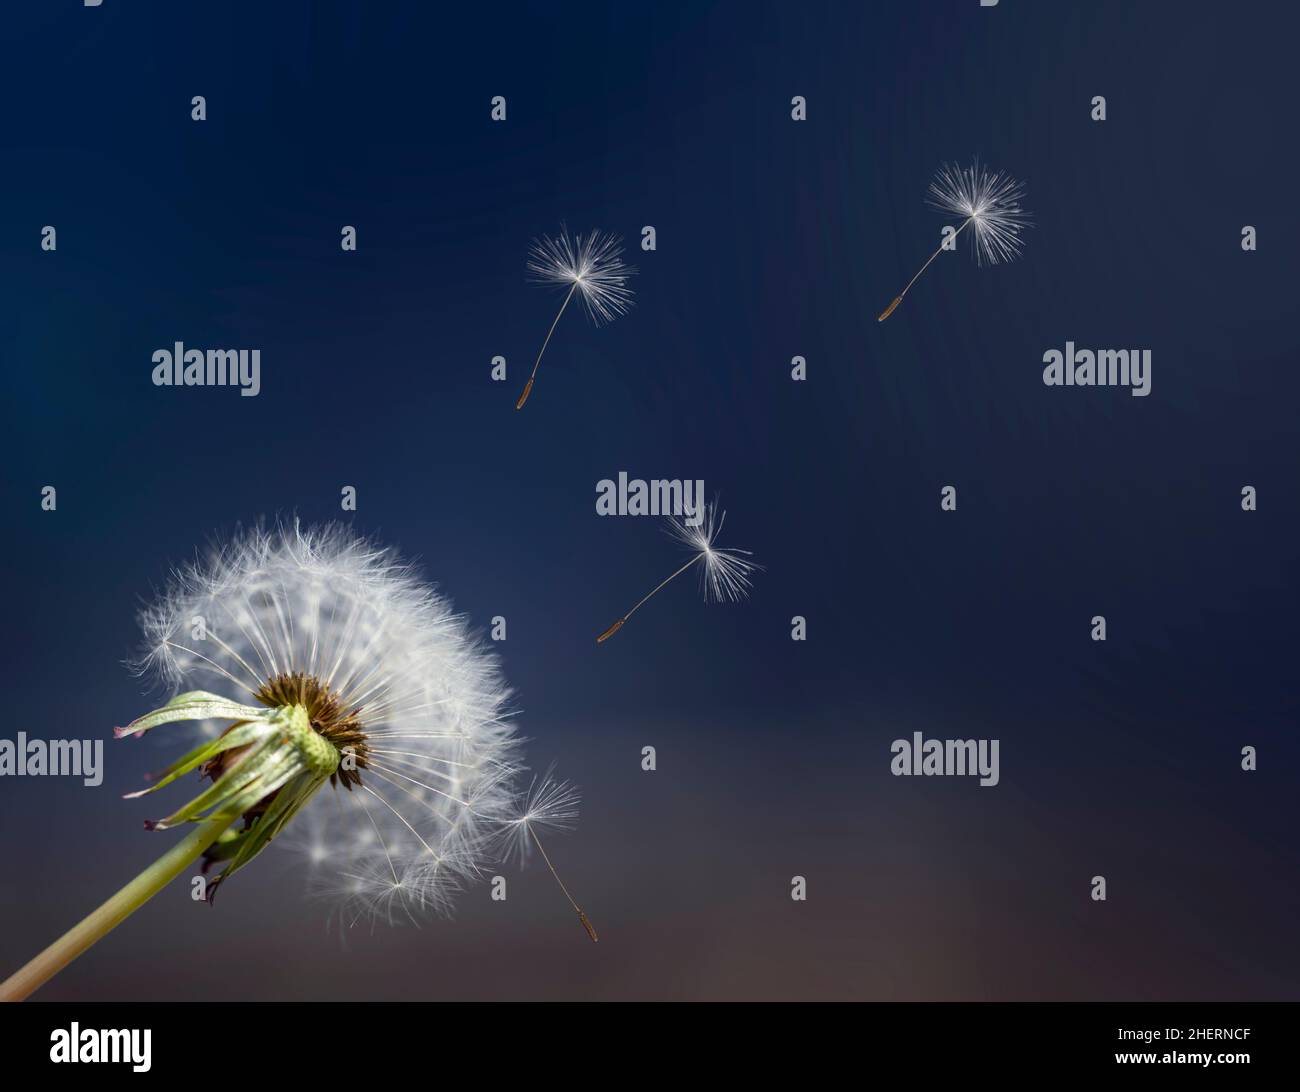 dandelion blowball flower with flying umbrella seeds on blue background Stock Photo